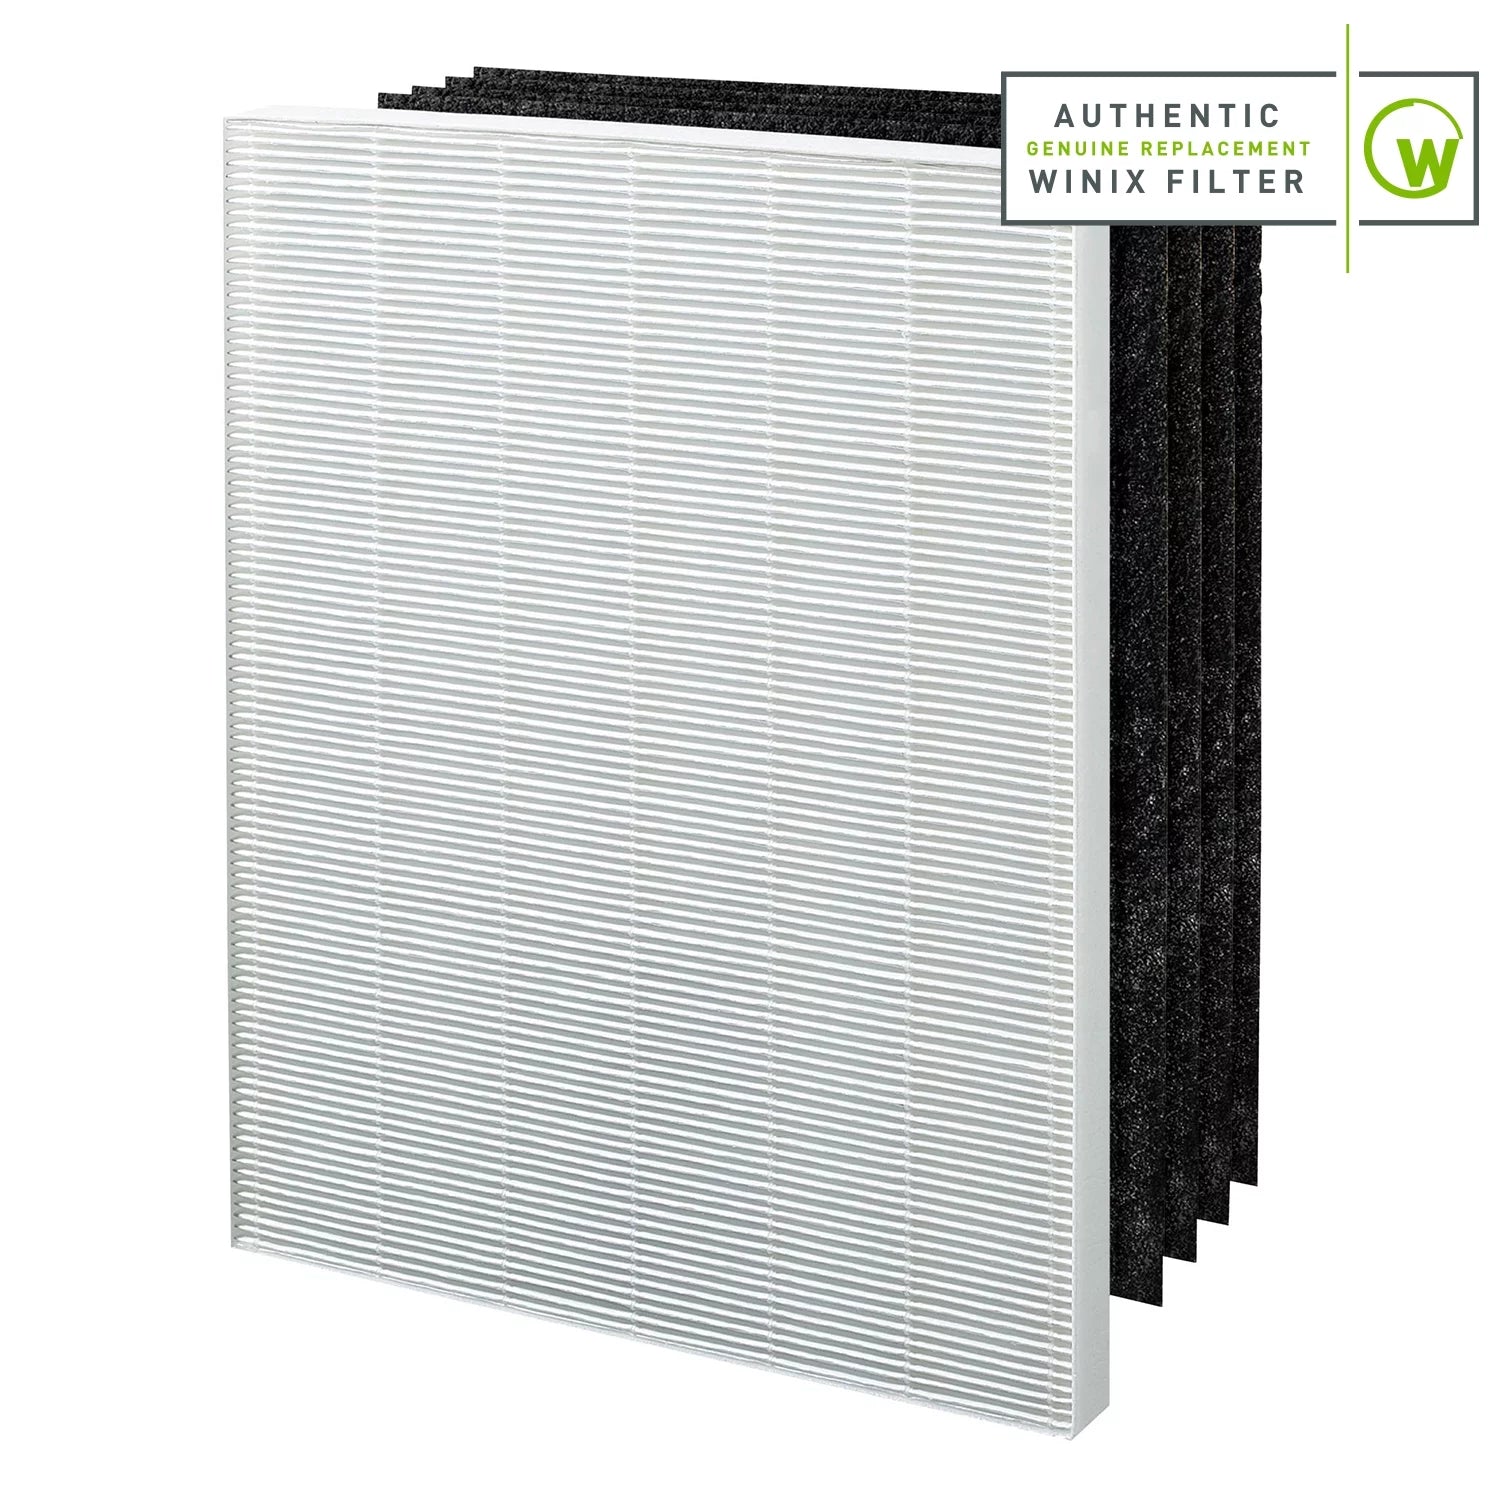 WINIX 115115 Replacement Filter A for C535, 5300-2, 6300-2, AM90, P300, 5300 and 6300